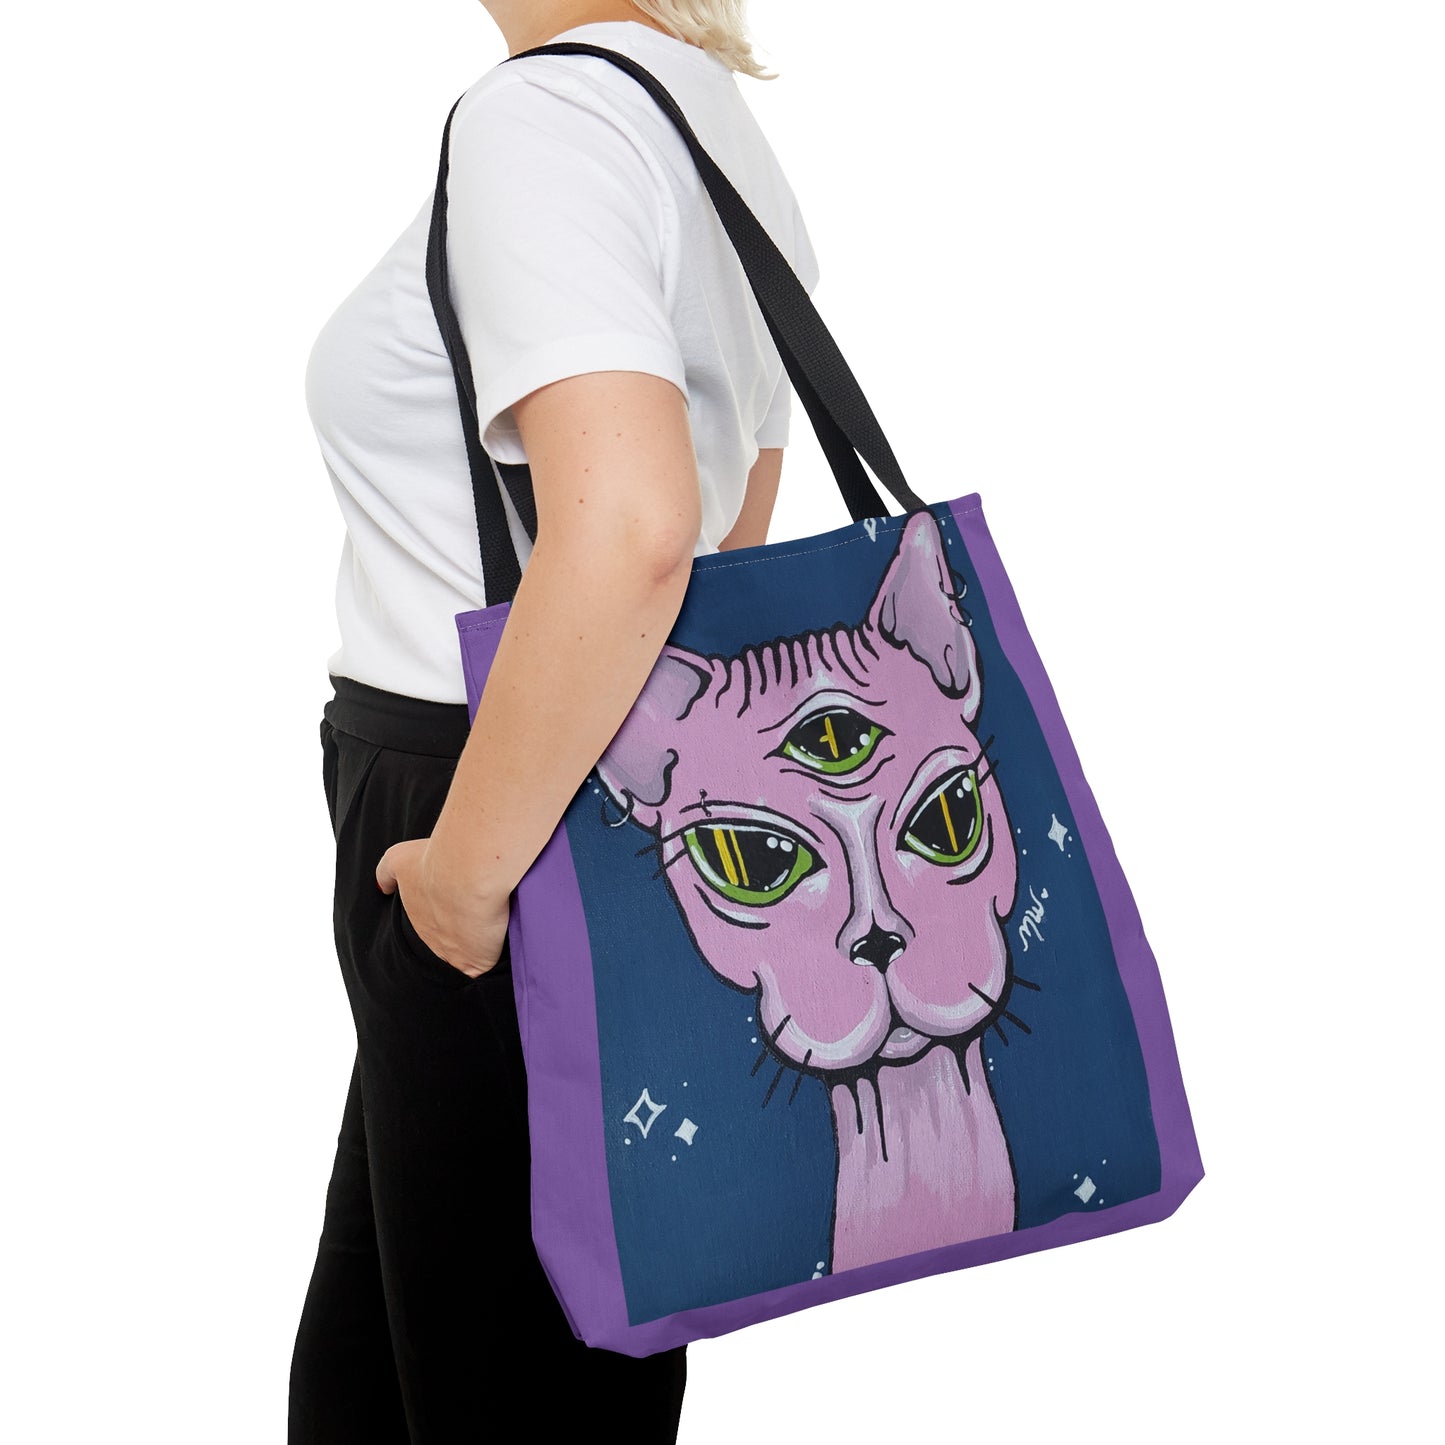 Madame Feline Tote Bag (Peculiar Paintings Collection) PURPLE